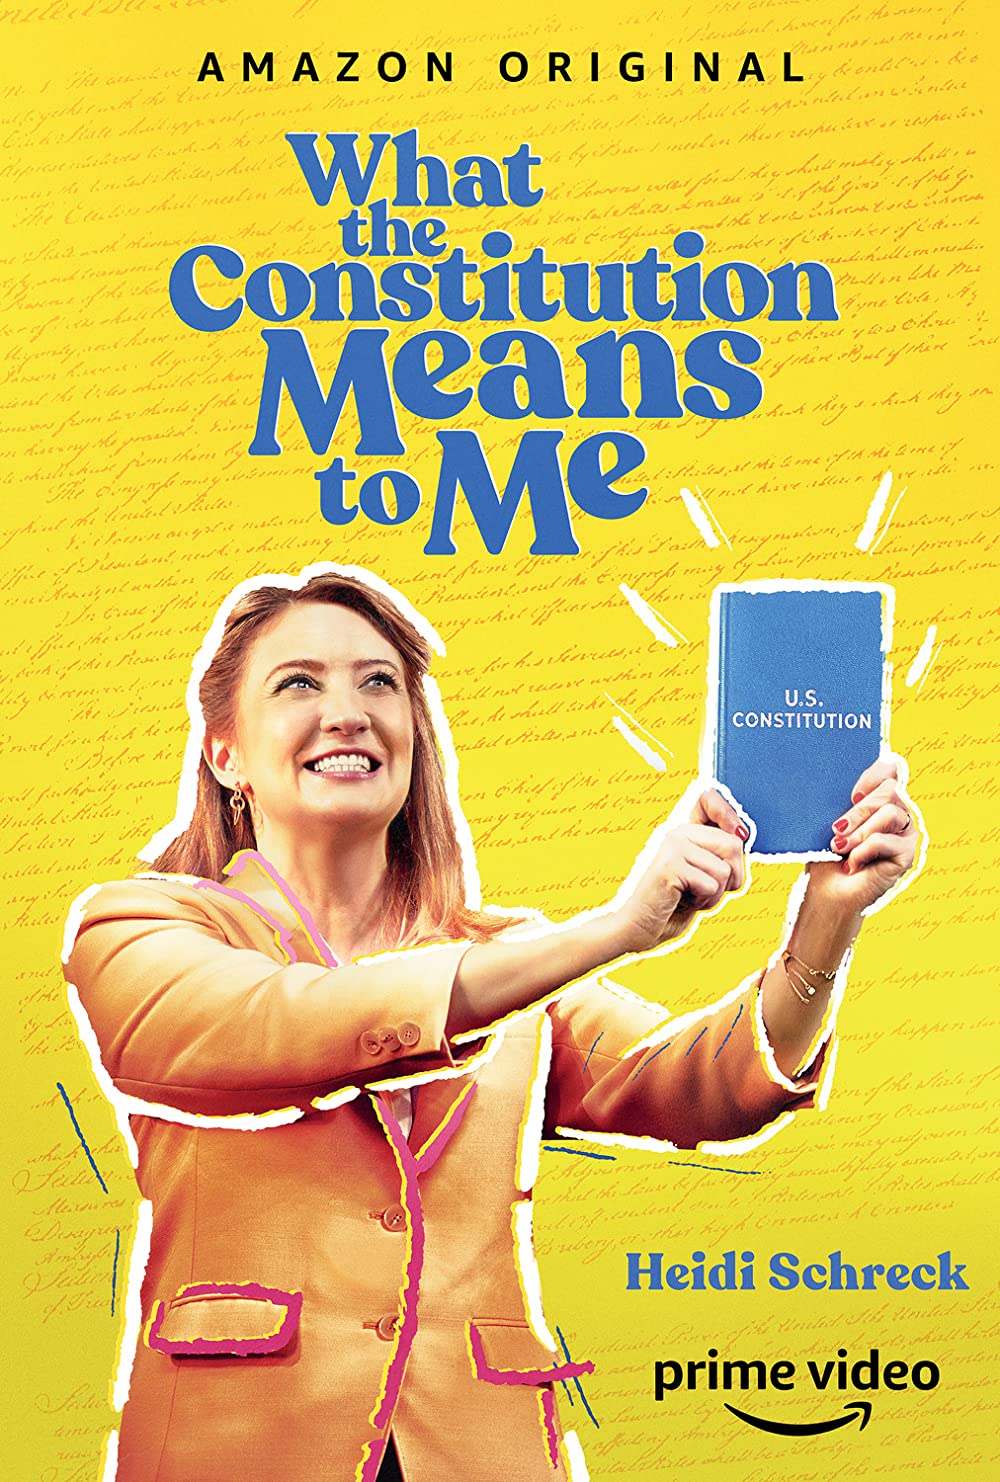 Filmbeschreibung zu What The Constitution Means To Me